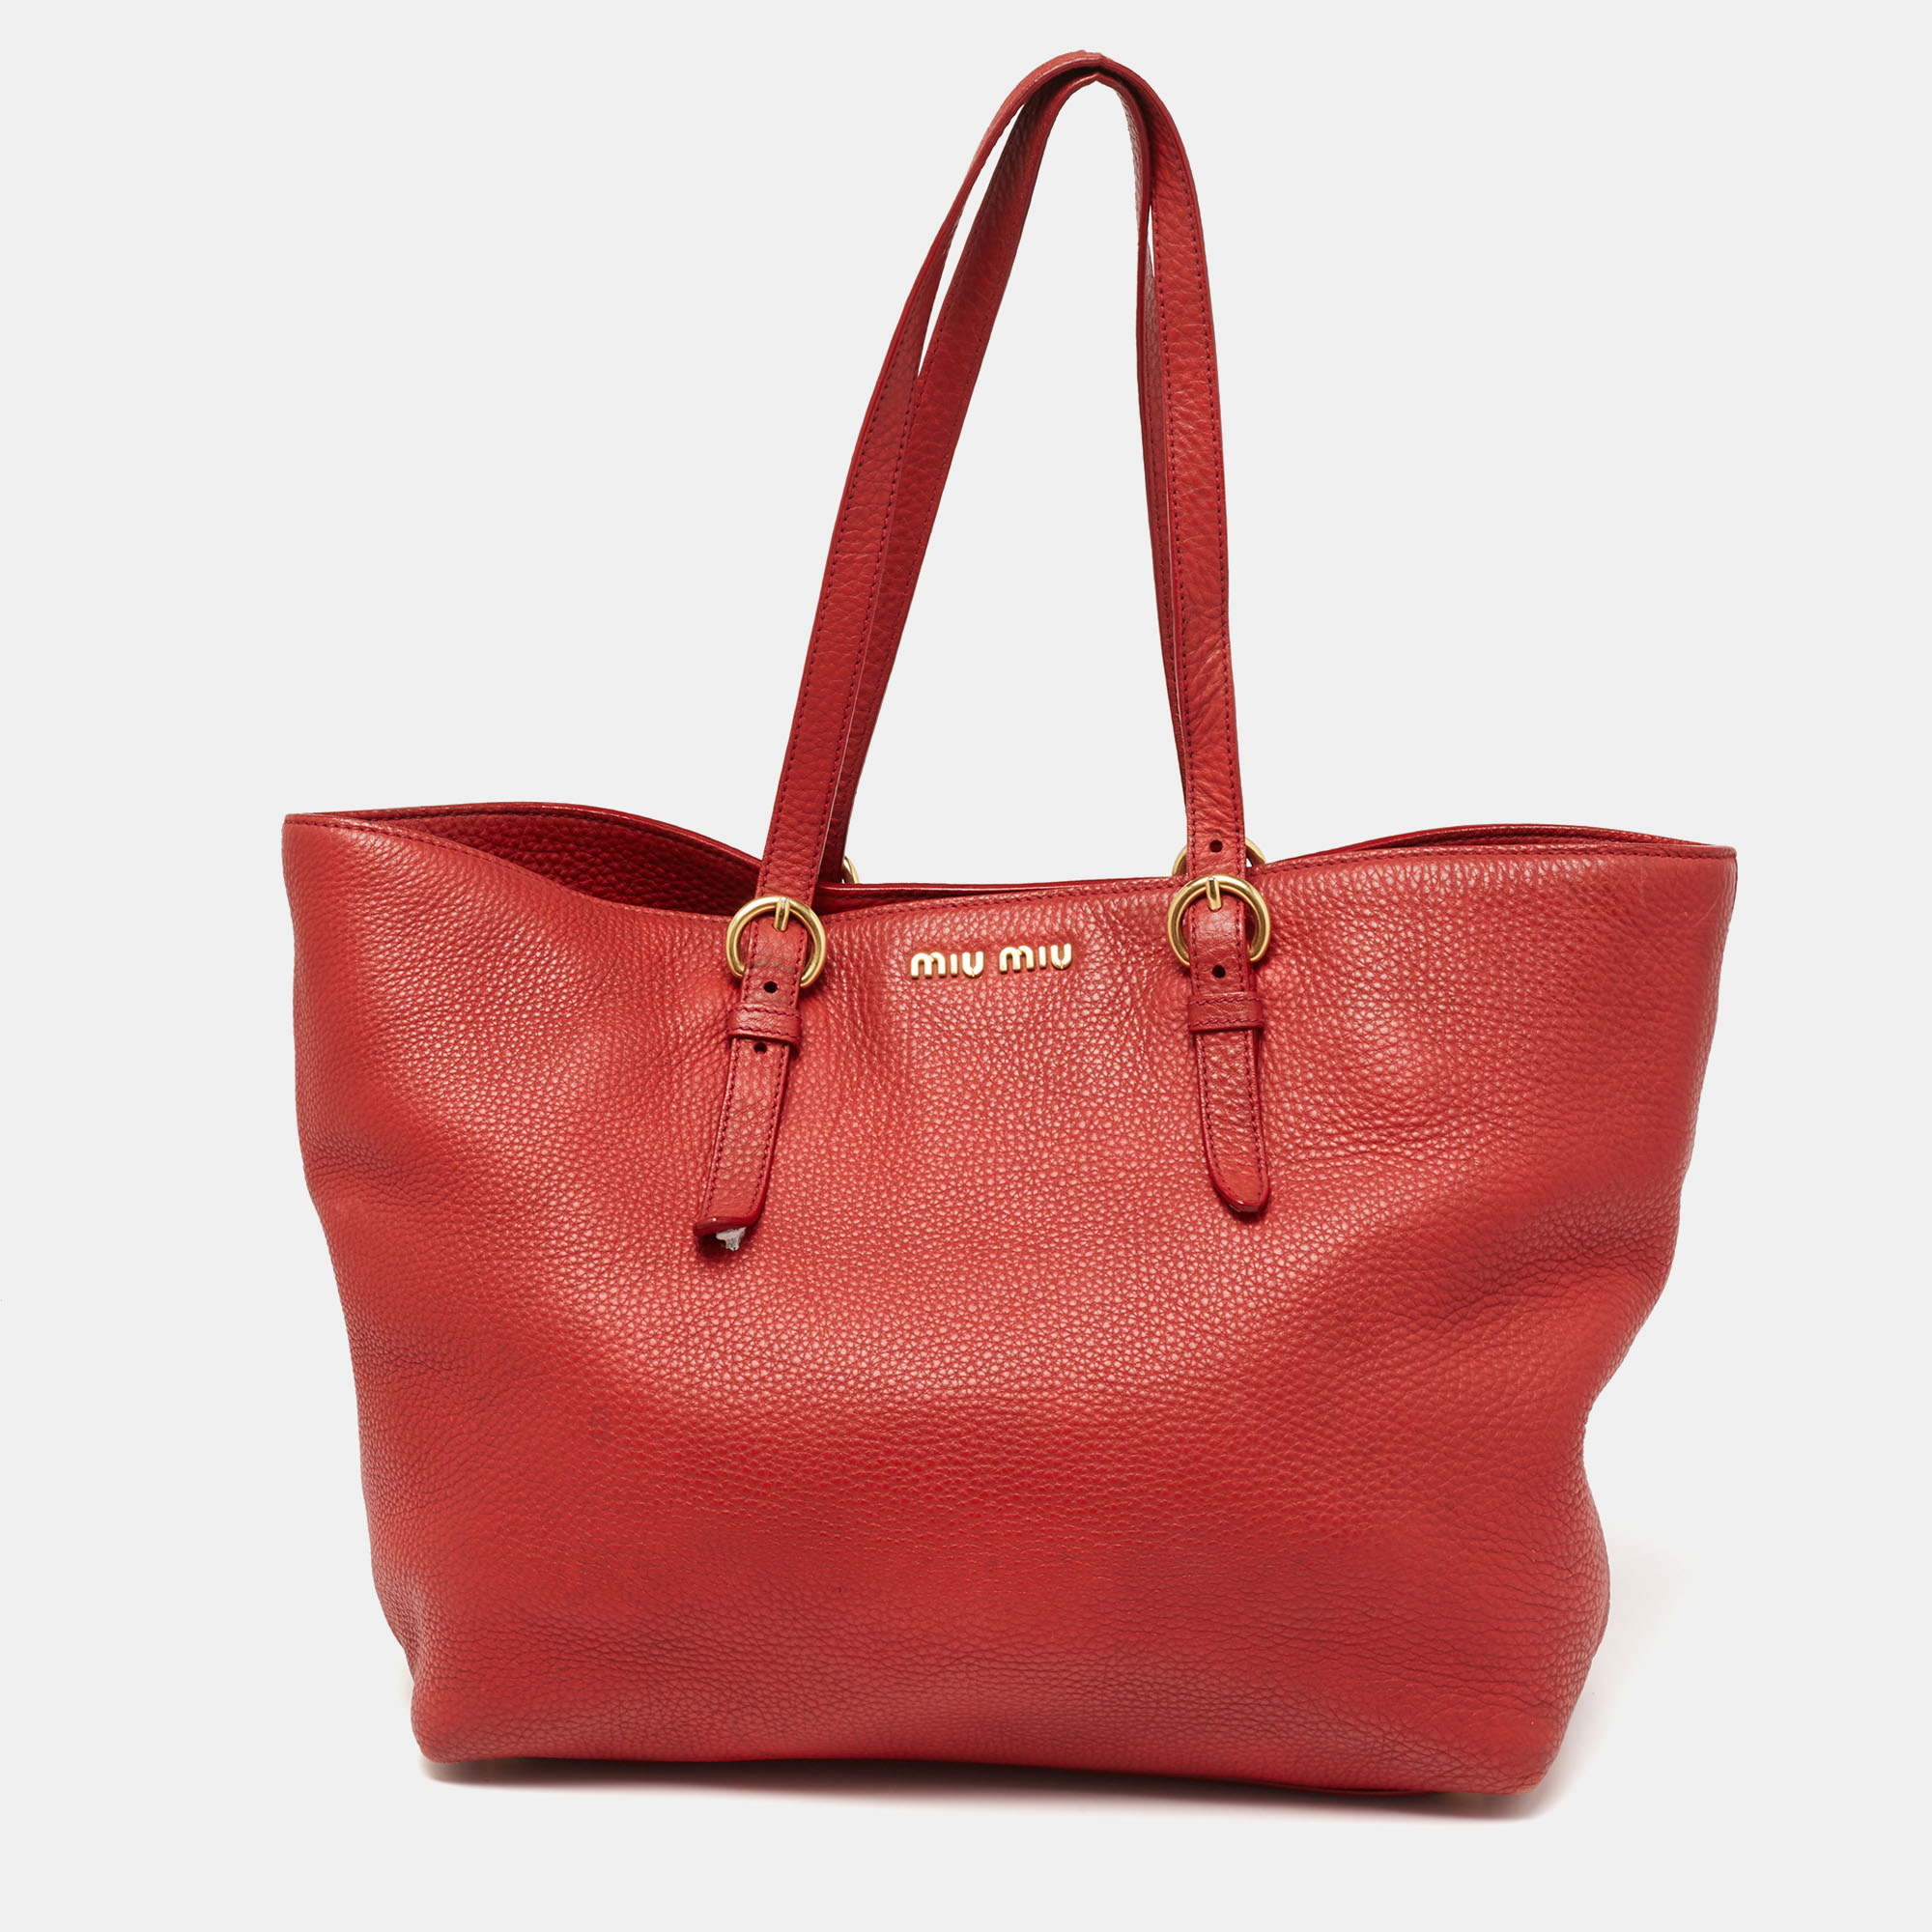 You don't have to worry about things missing or falling with this shopper tote from Miu Miu. Made from red leather this tote features two attached handles and a removable shoulder strap. The satin lined interior is sized to carry your belongings easily whether you are heading to work the mall or traveling.